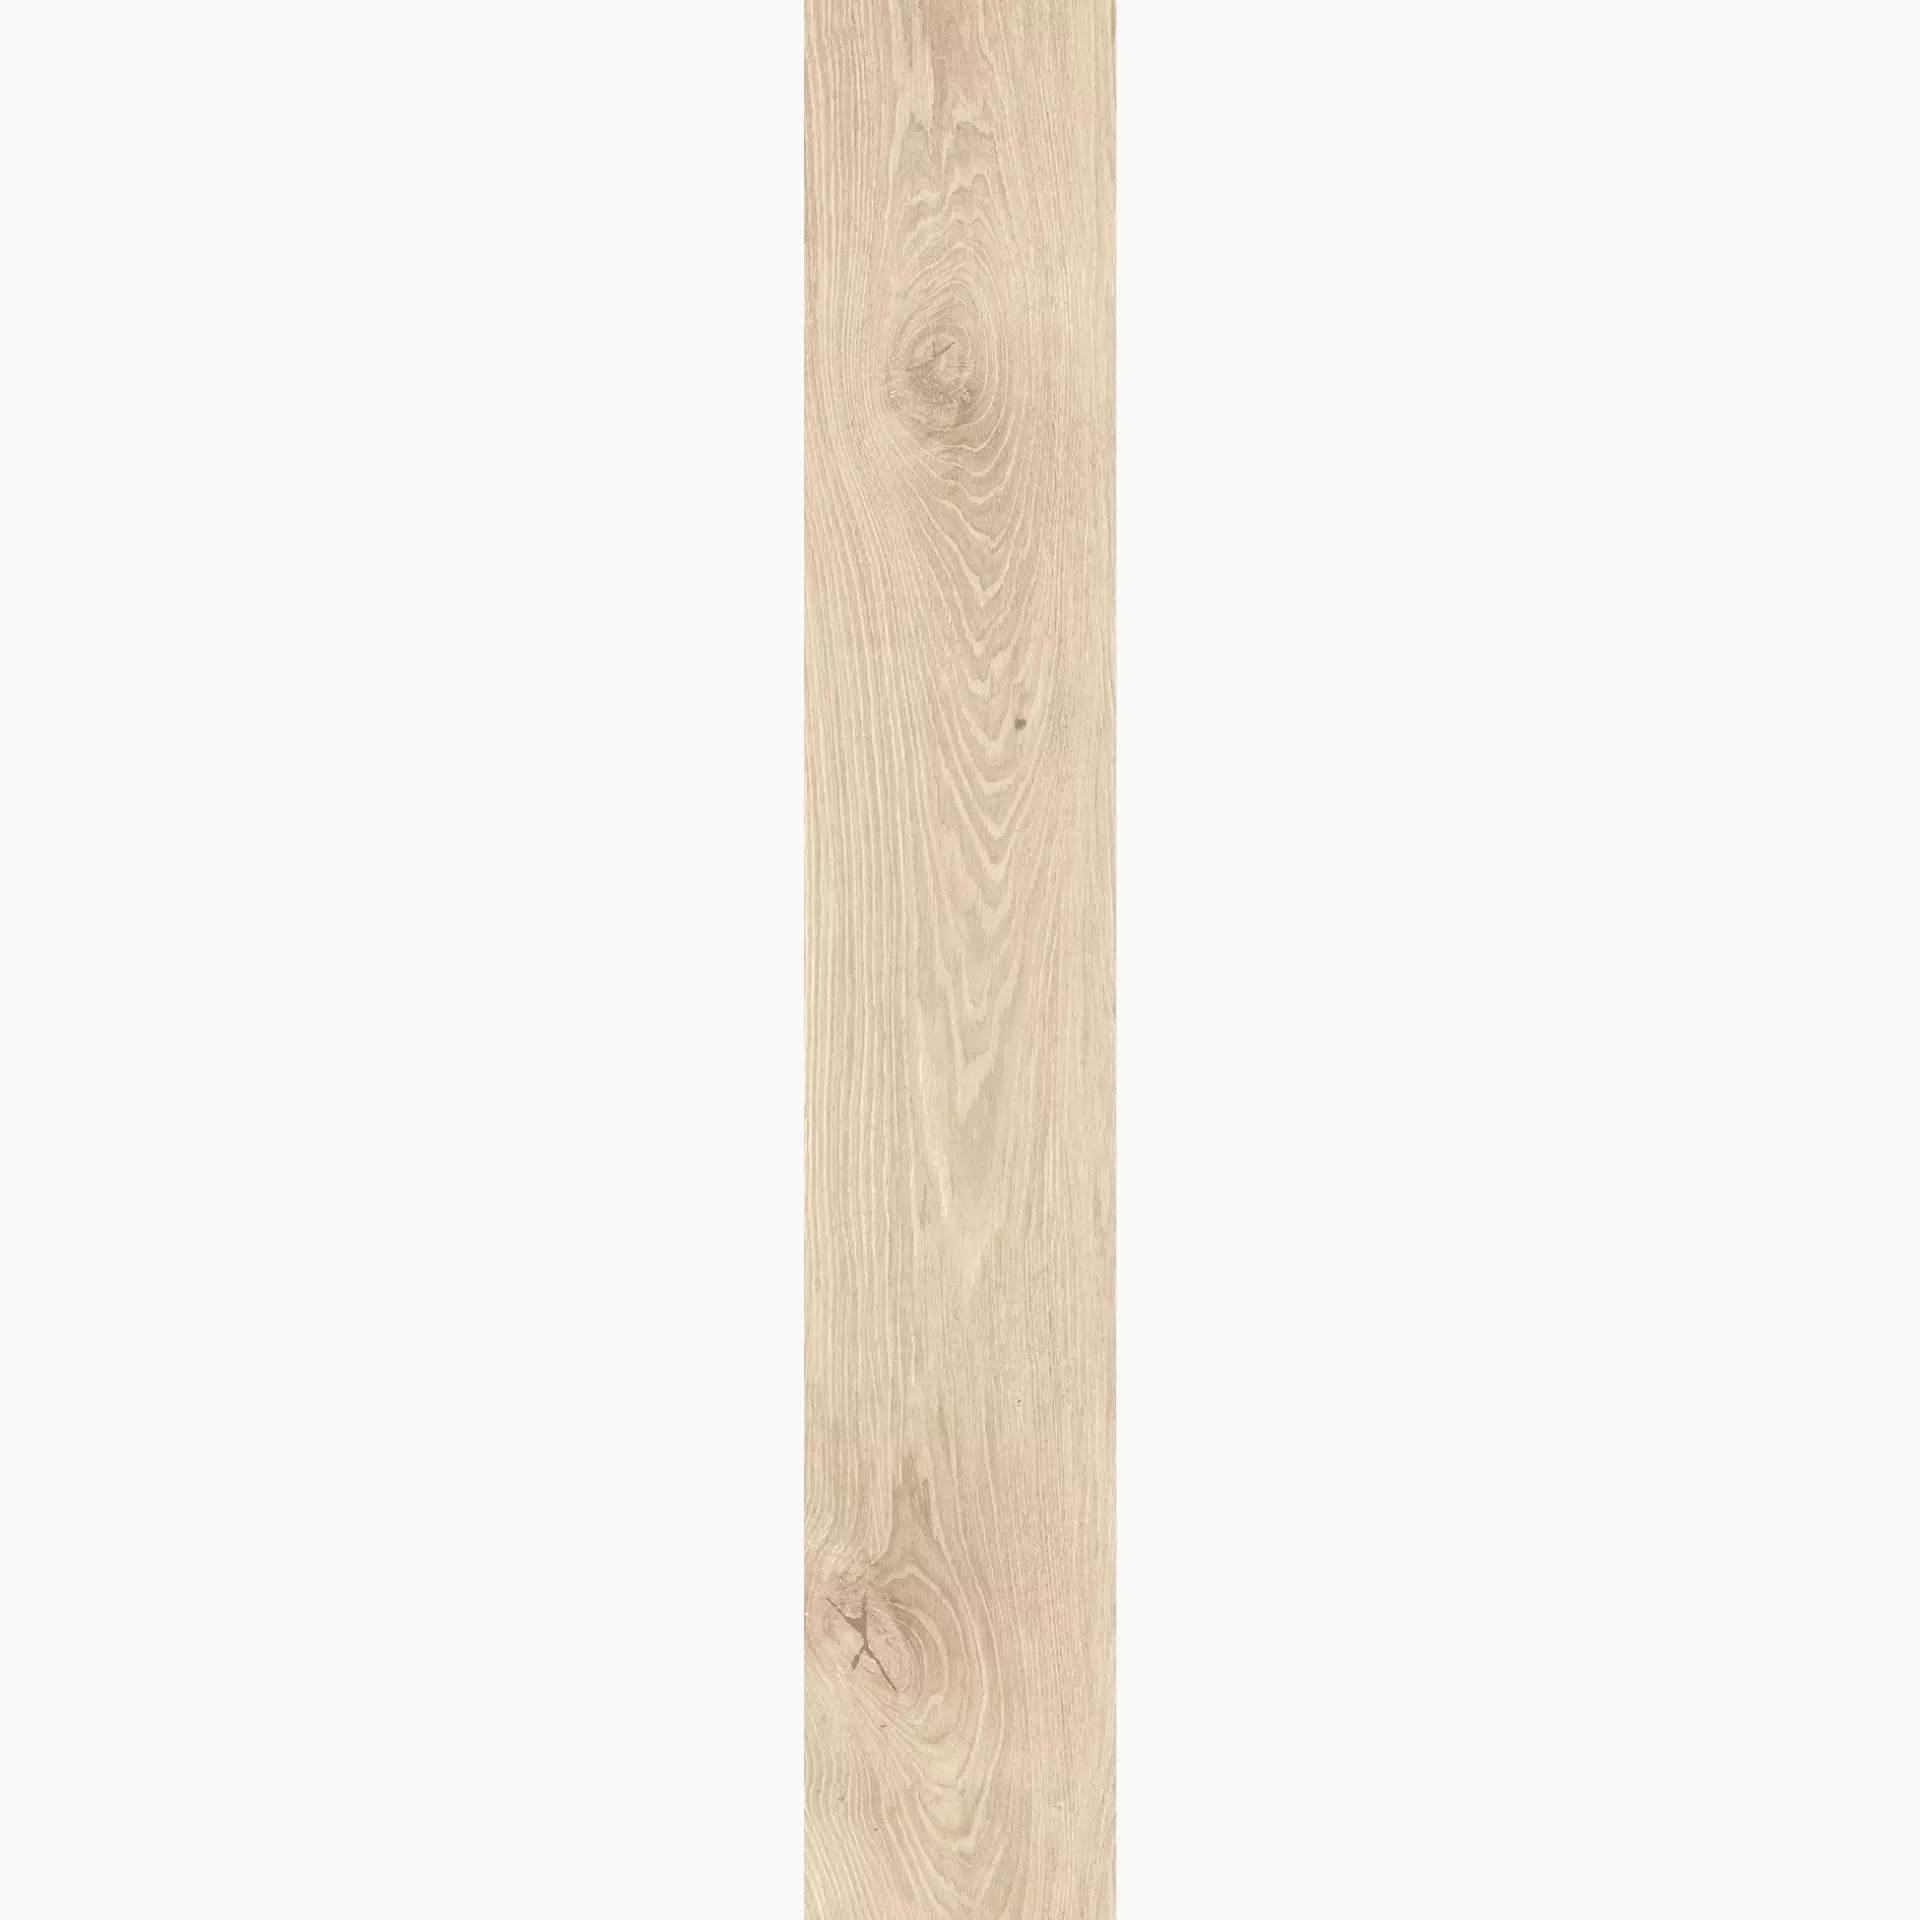 Novabell Artwood Maple Naturale AWD86RT 26x160cm rectified 9,5mm